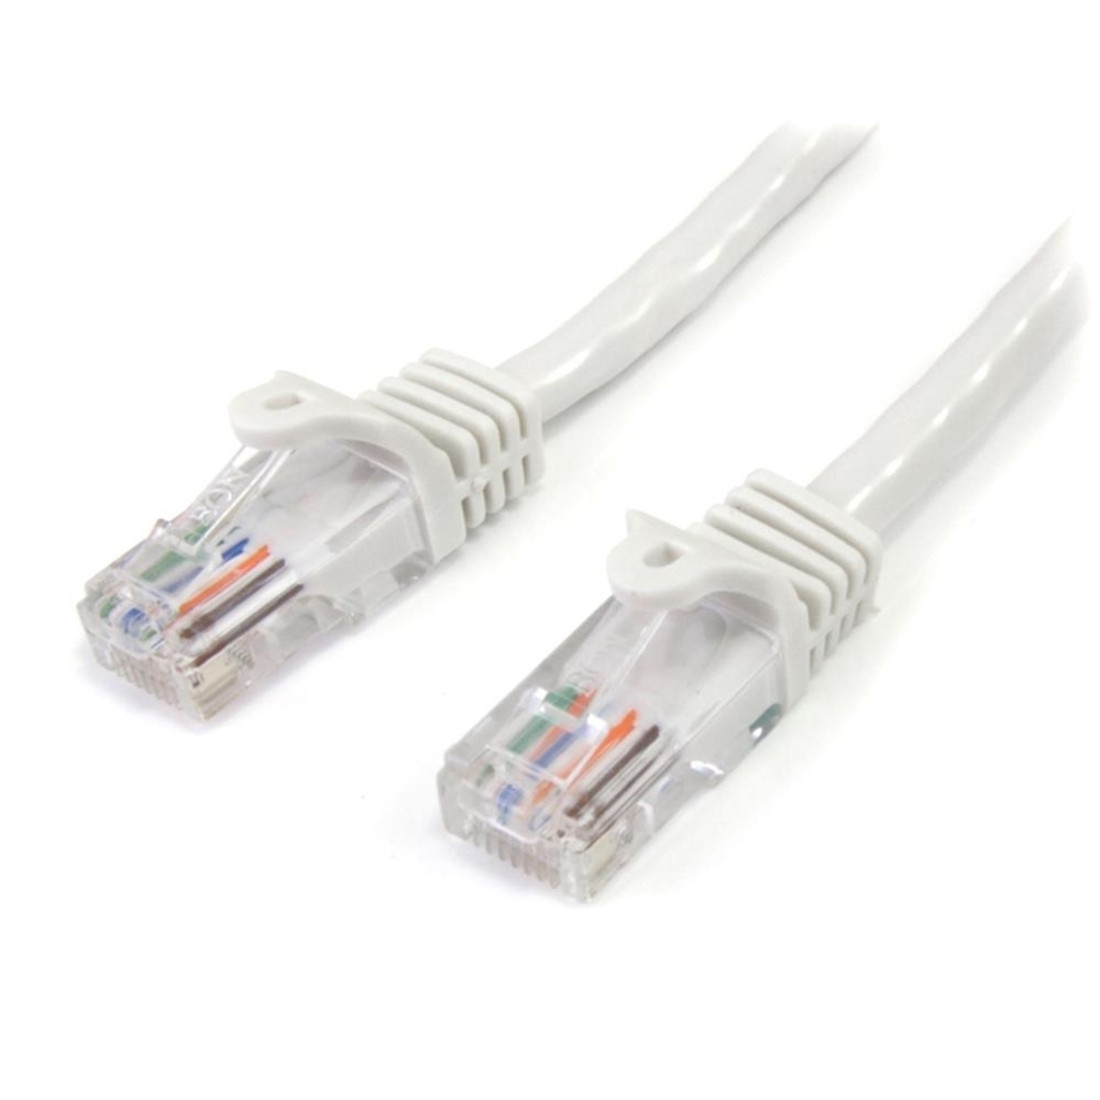 Startech .com 7ft White Snagless Cat5e UTP Patch CableCategory 5e7 ft1 x RJ-45 Male Network1 x RJ-45 Male NetworkWhite 45PATCH7WH